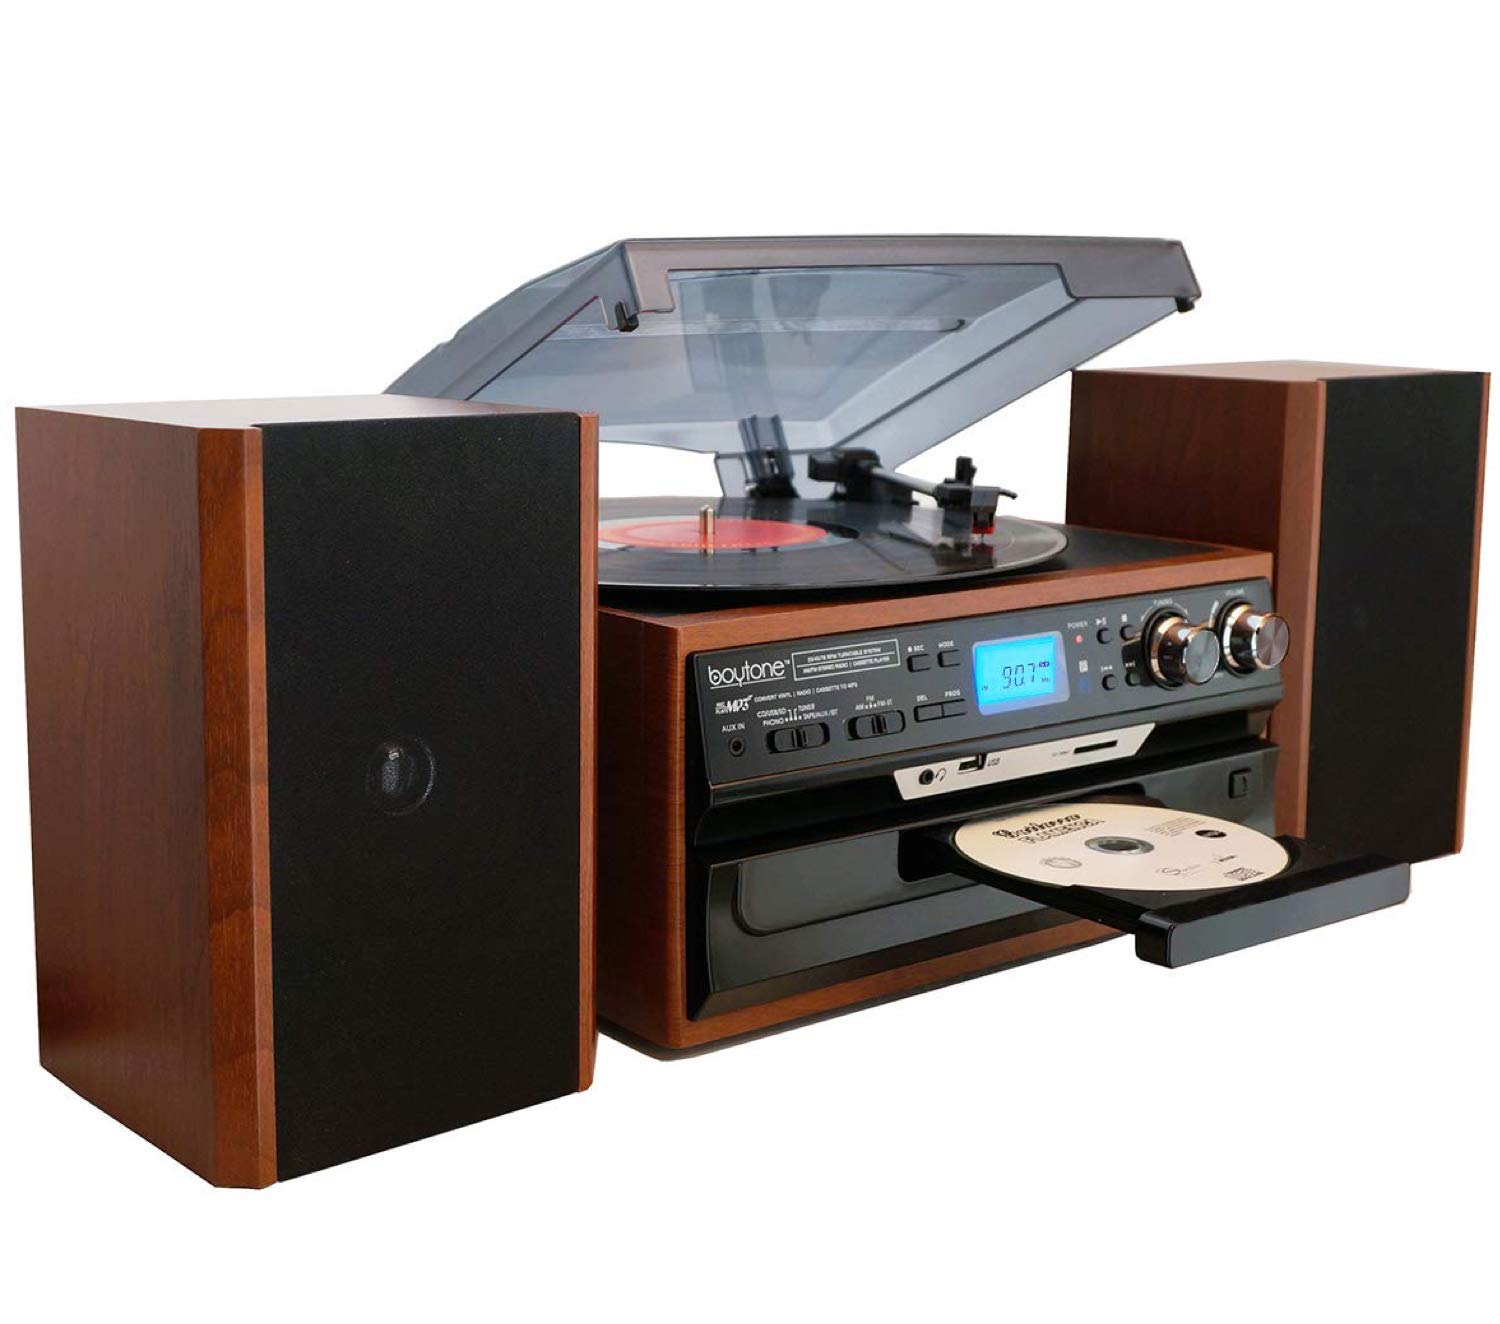 Boytone BT-24MB Bluetooth Classic Style Record Player Turntable with AM/FM Radio, CD/Cassette Player